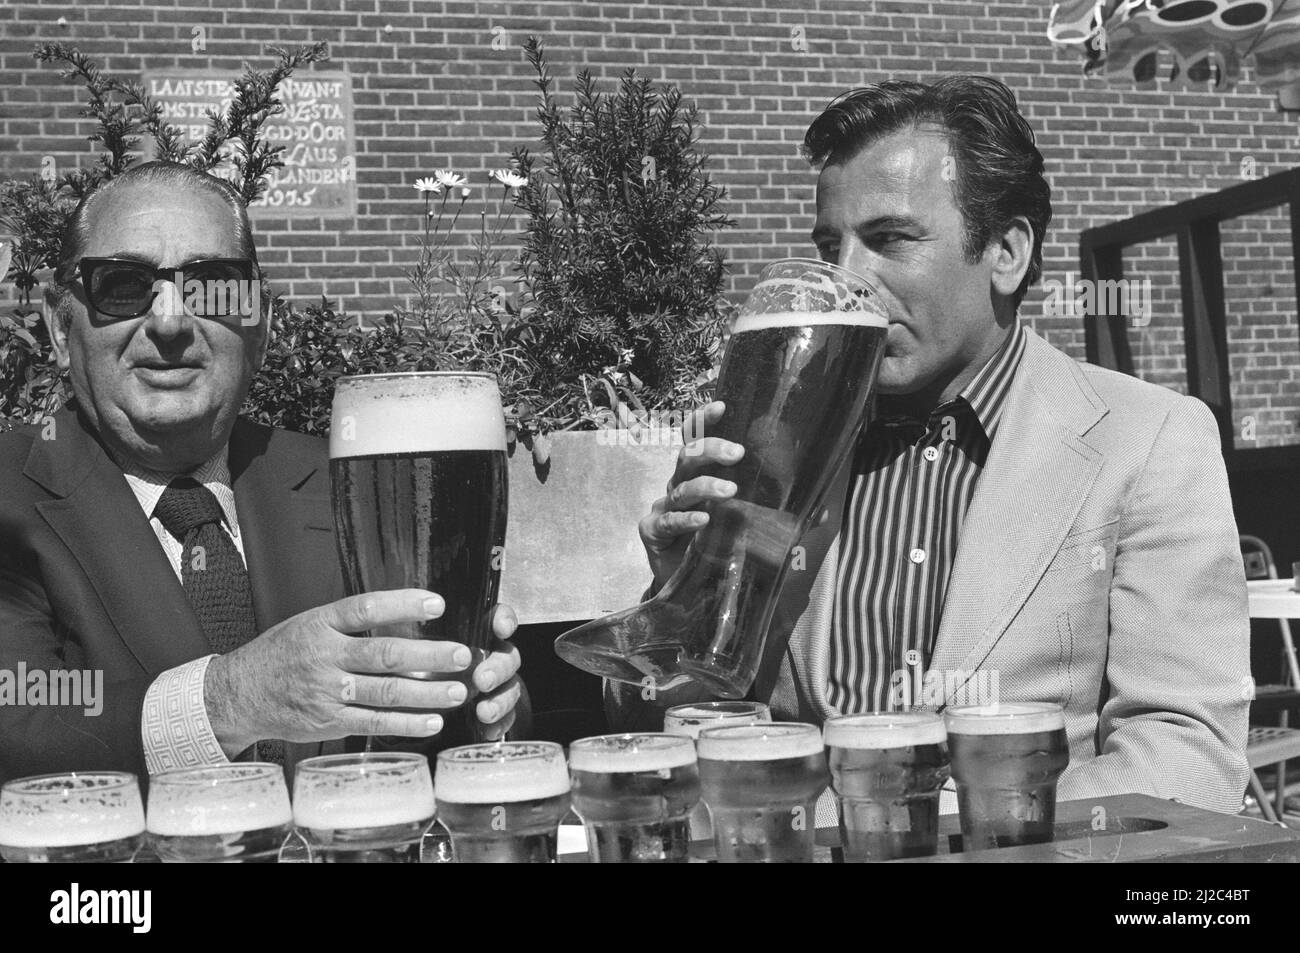 Actor Maximilian Schell in  een Brug te Ver, gives a press conference in Amsterdam, left producer Levine, right Schell with boot beer ca. 13 June 1976 Stock Photo